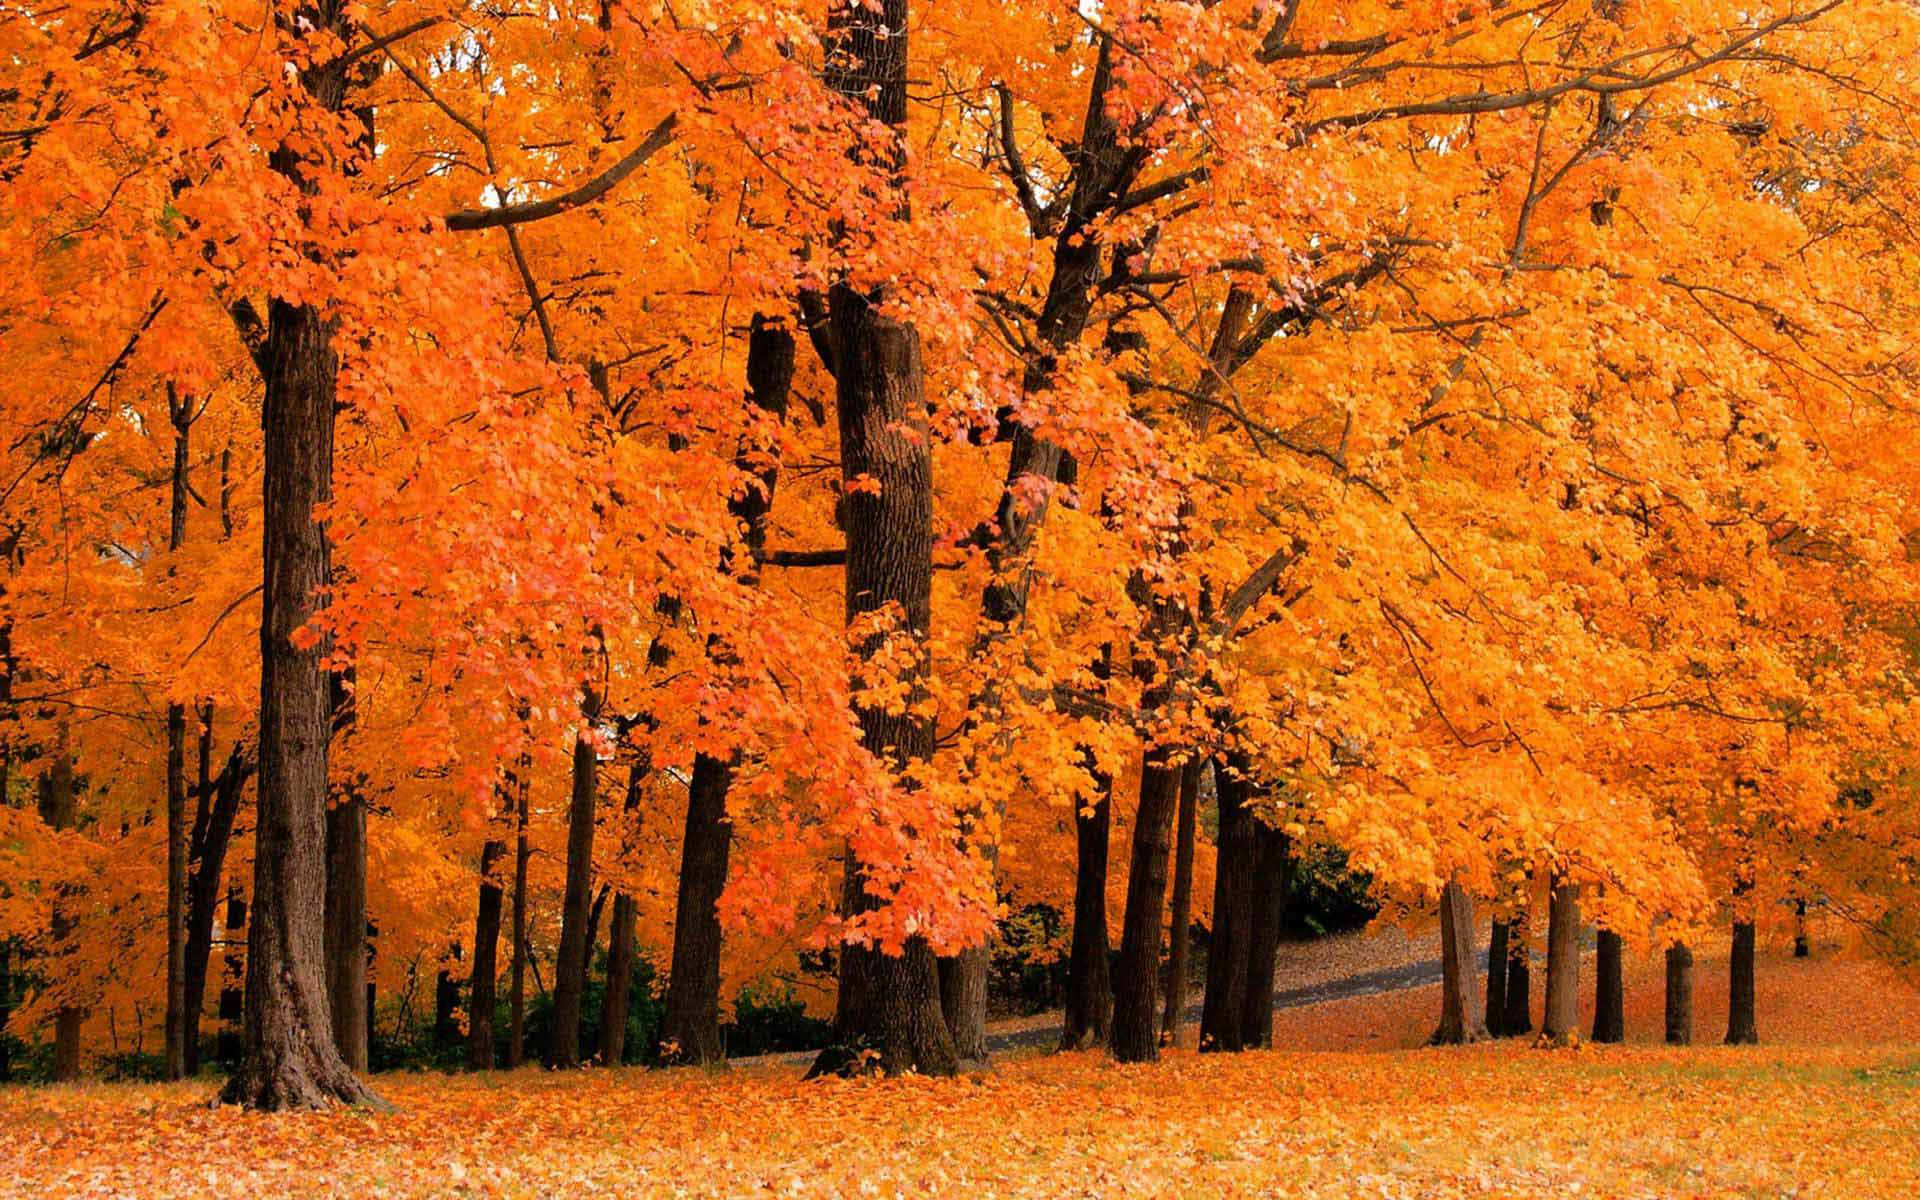 "Celebrate Fall with these Majestic Autumn Leaves"